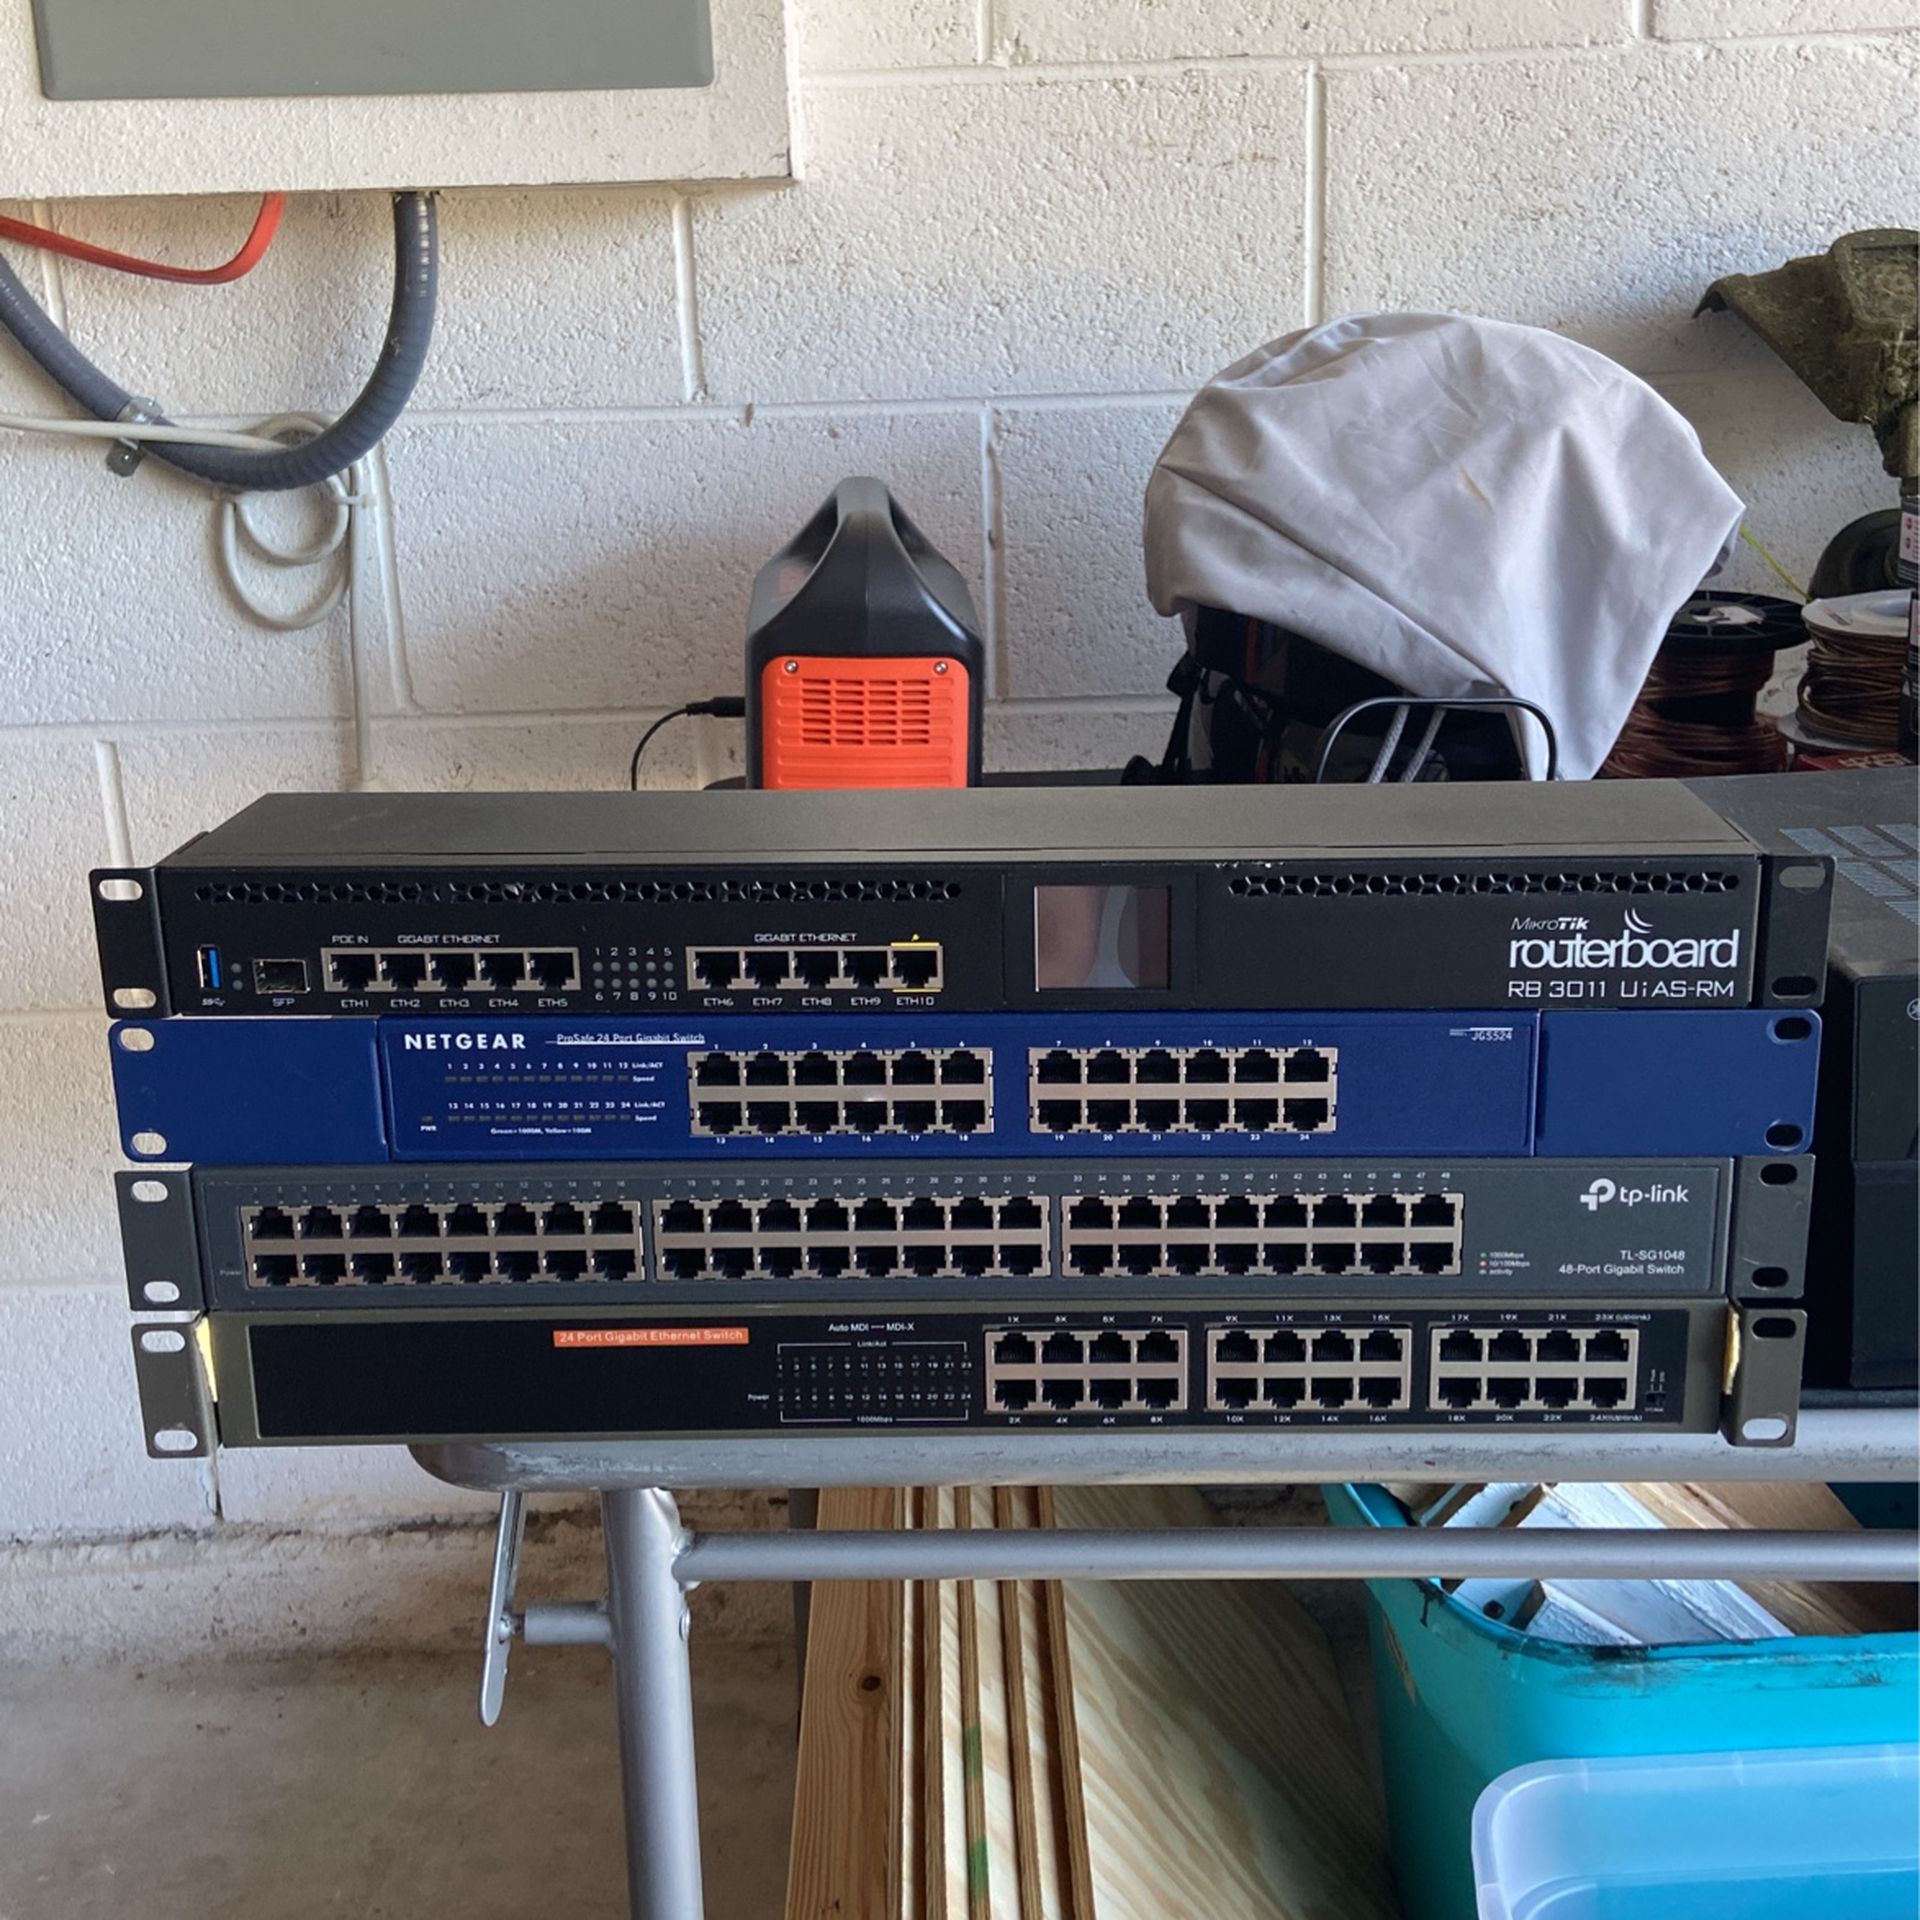 Network Switches/ Routers $1